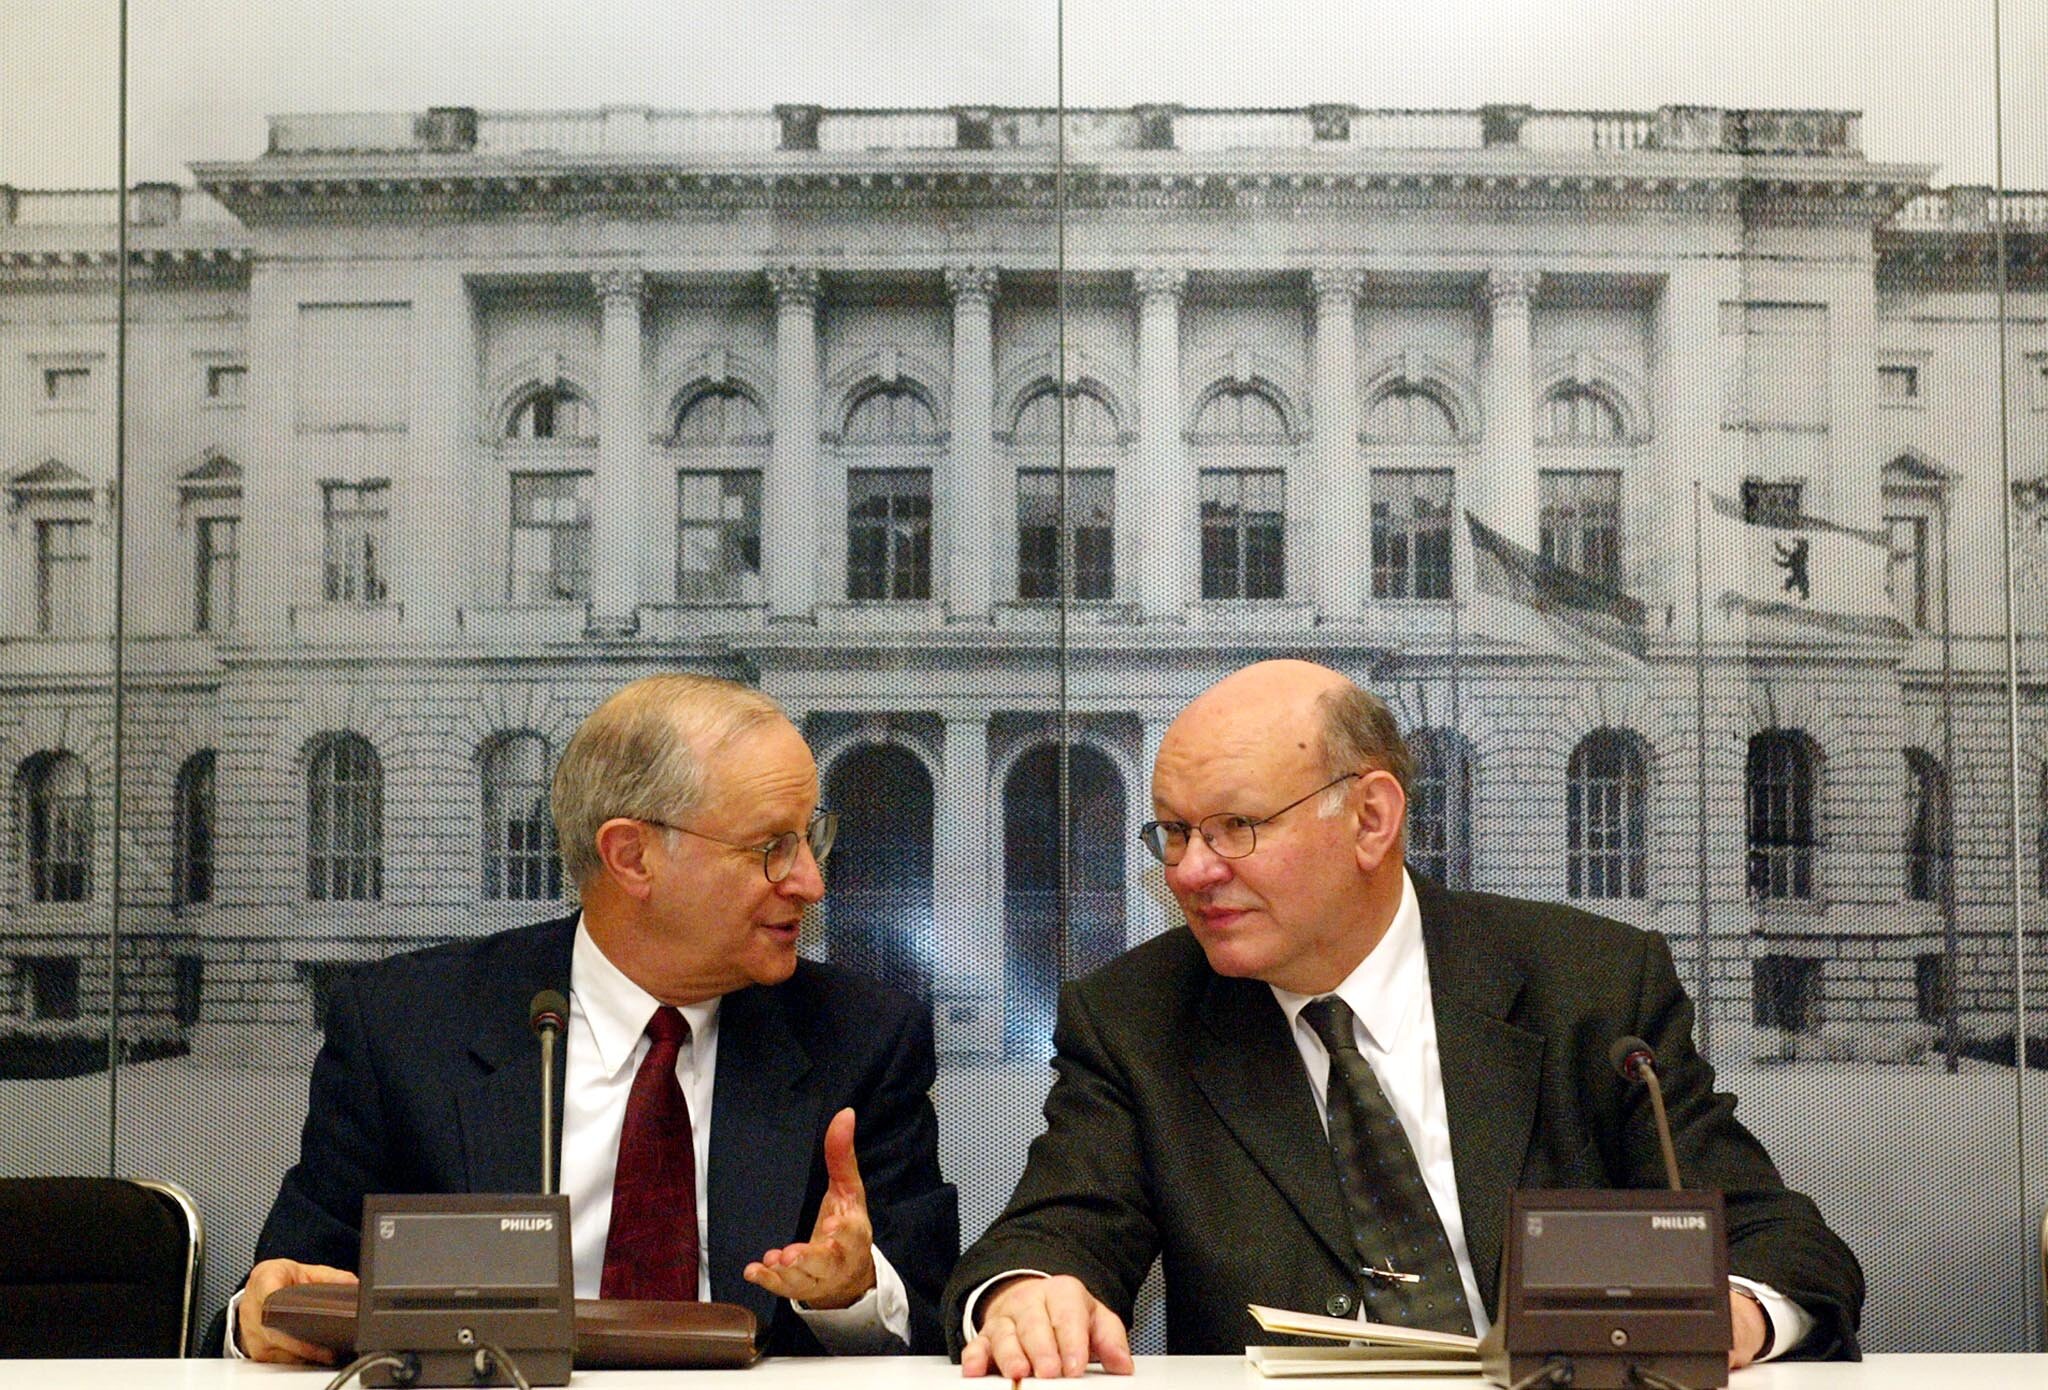  Arthur Obermayer and Walter Momper, then president of the Berlin Parliament, at an Obermayer Awards press conference in 2003. Momper was instrumental in bringing the awards to Parliament. 